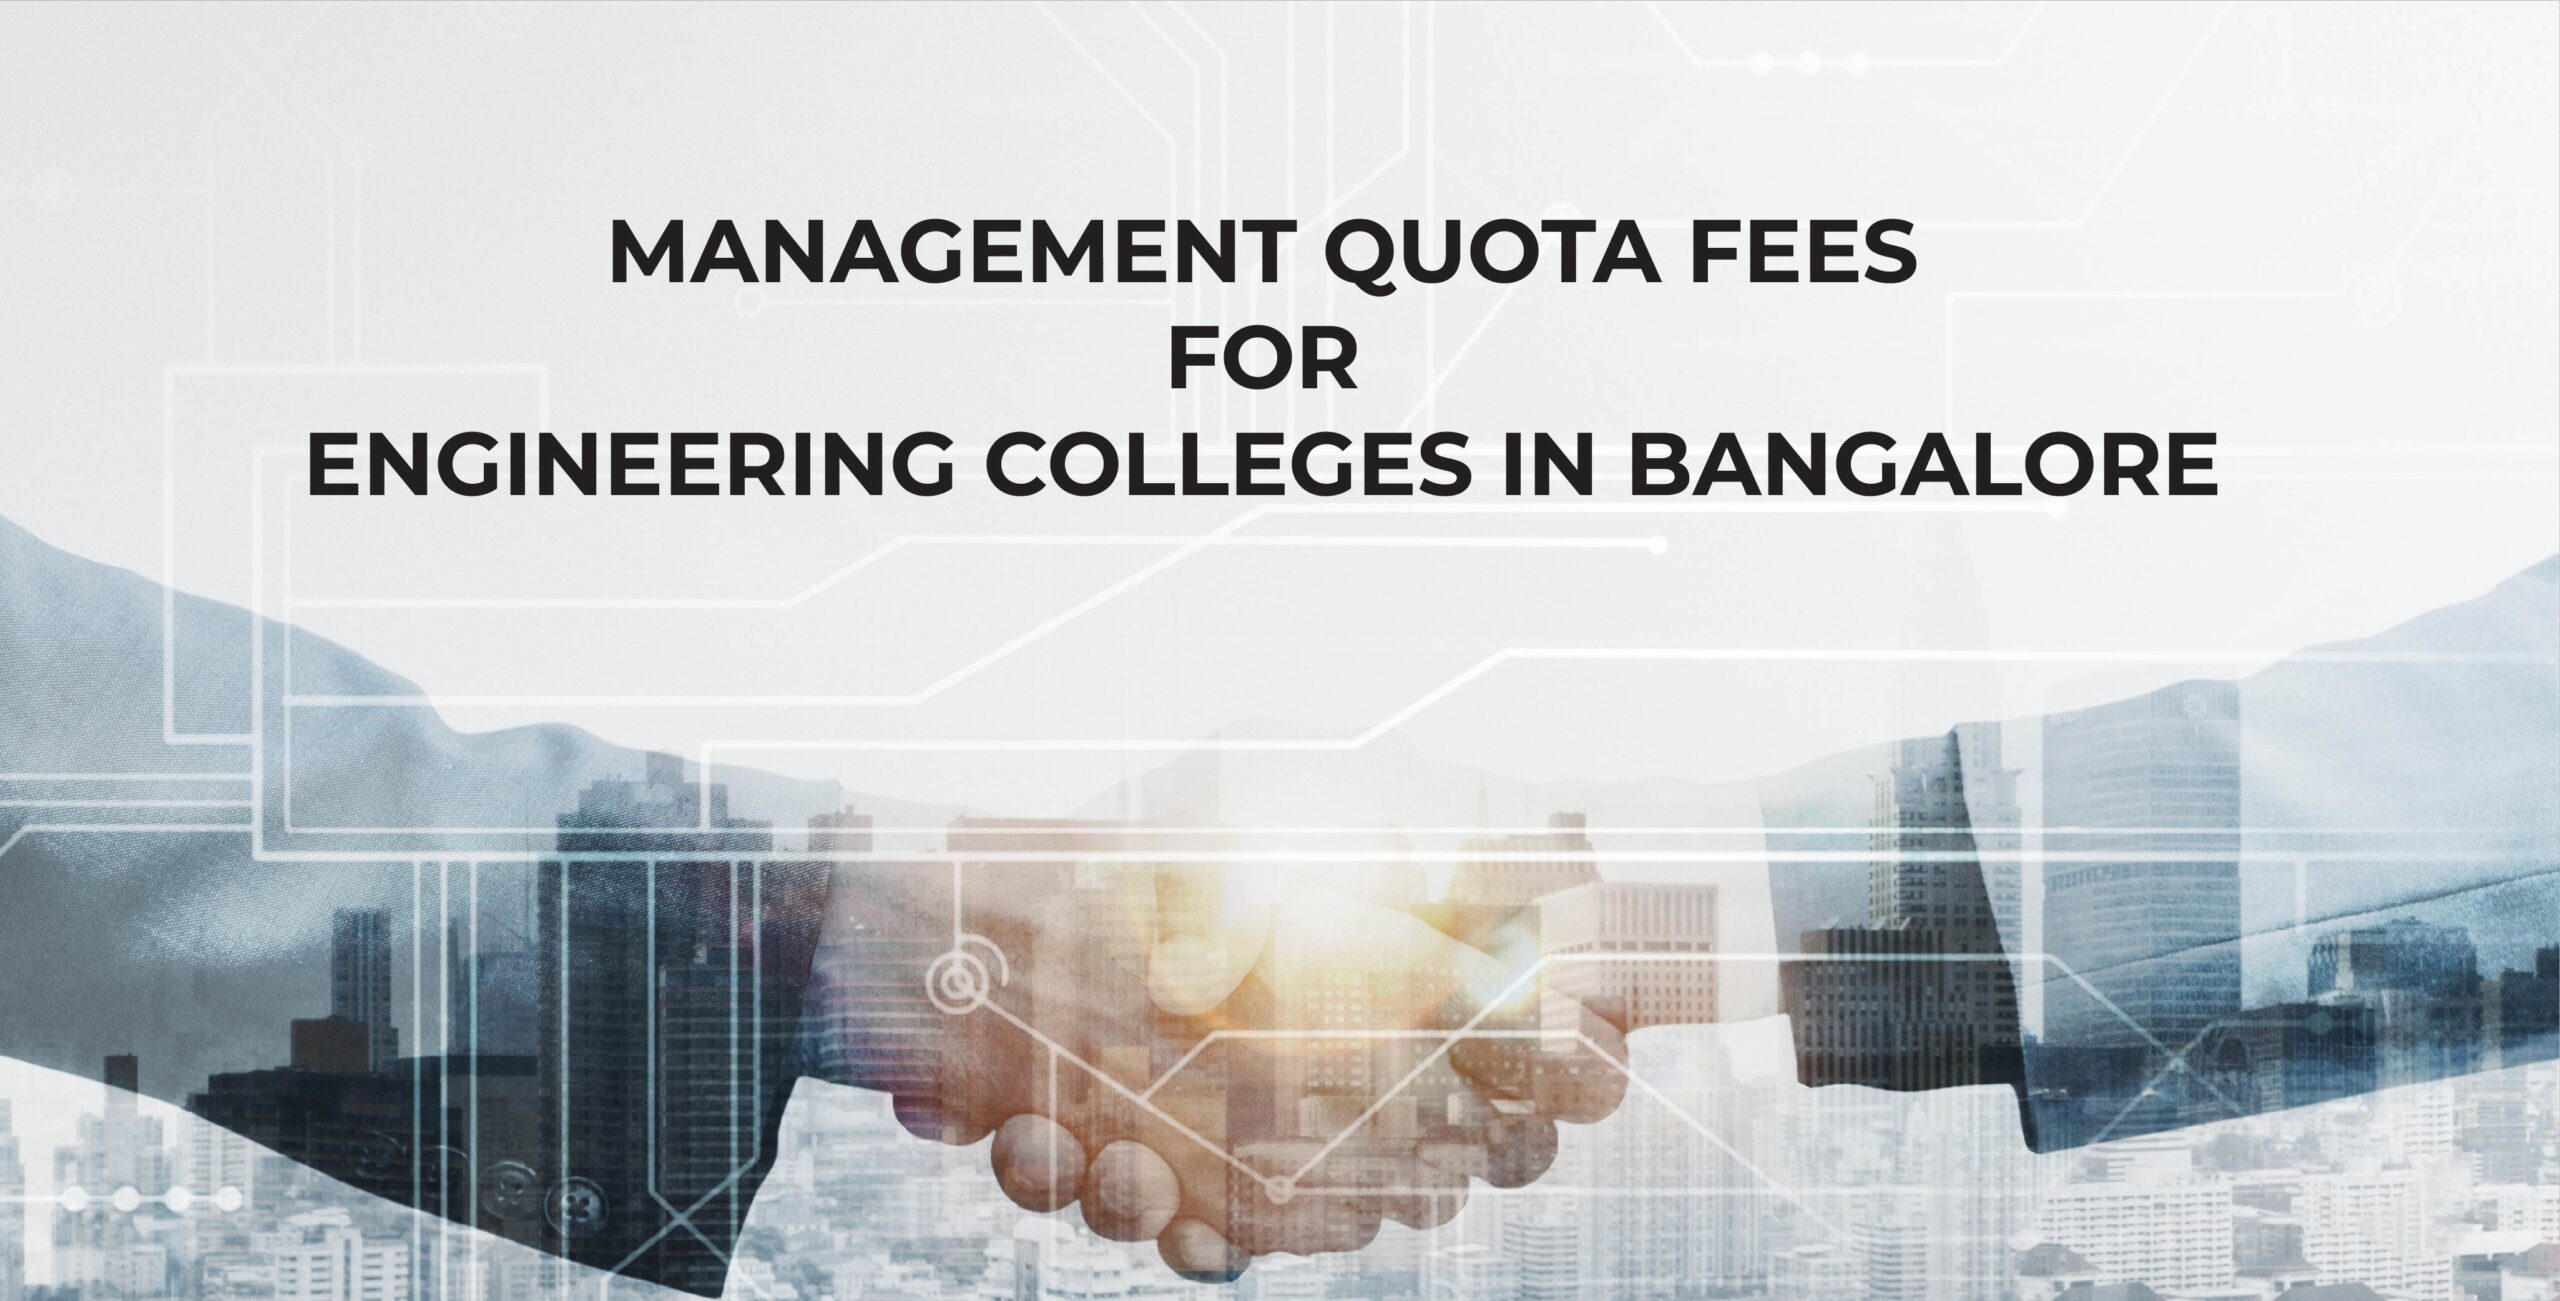 Management Quota Fees for Engineering Colleges in Bangalore